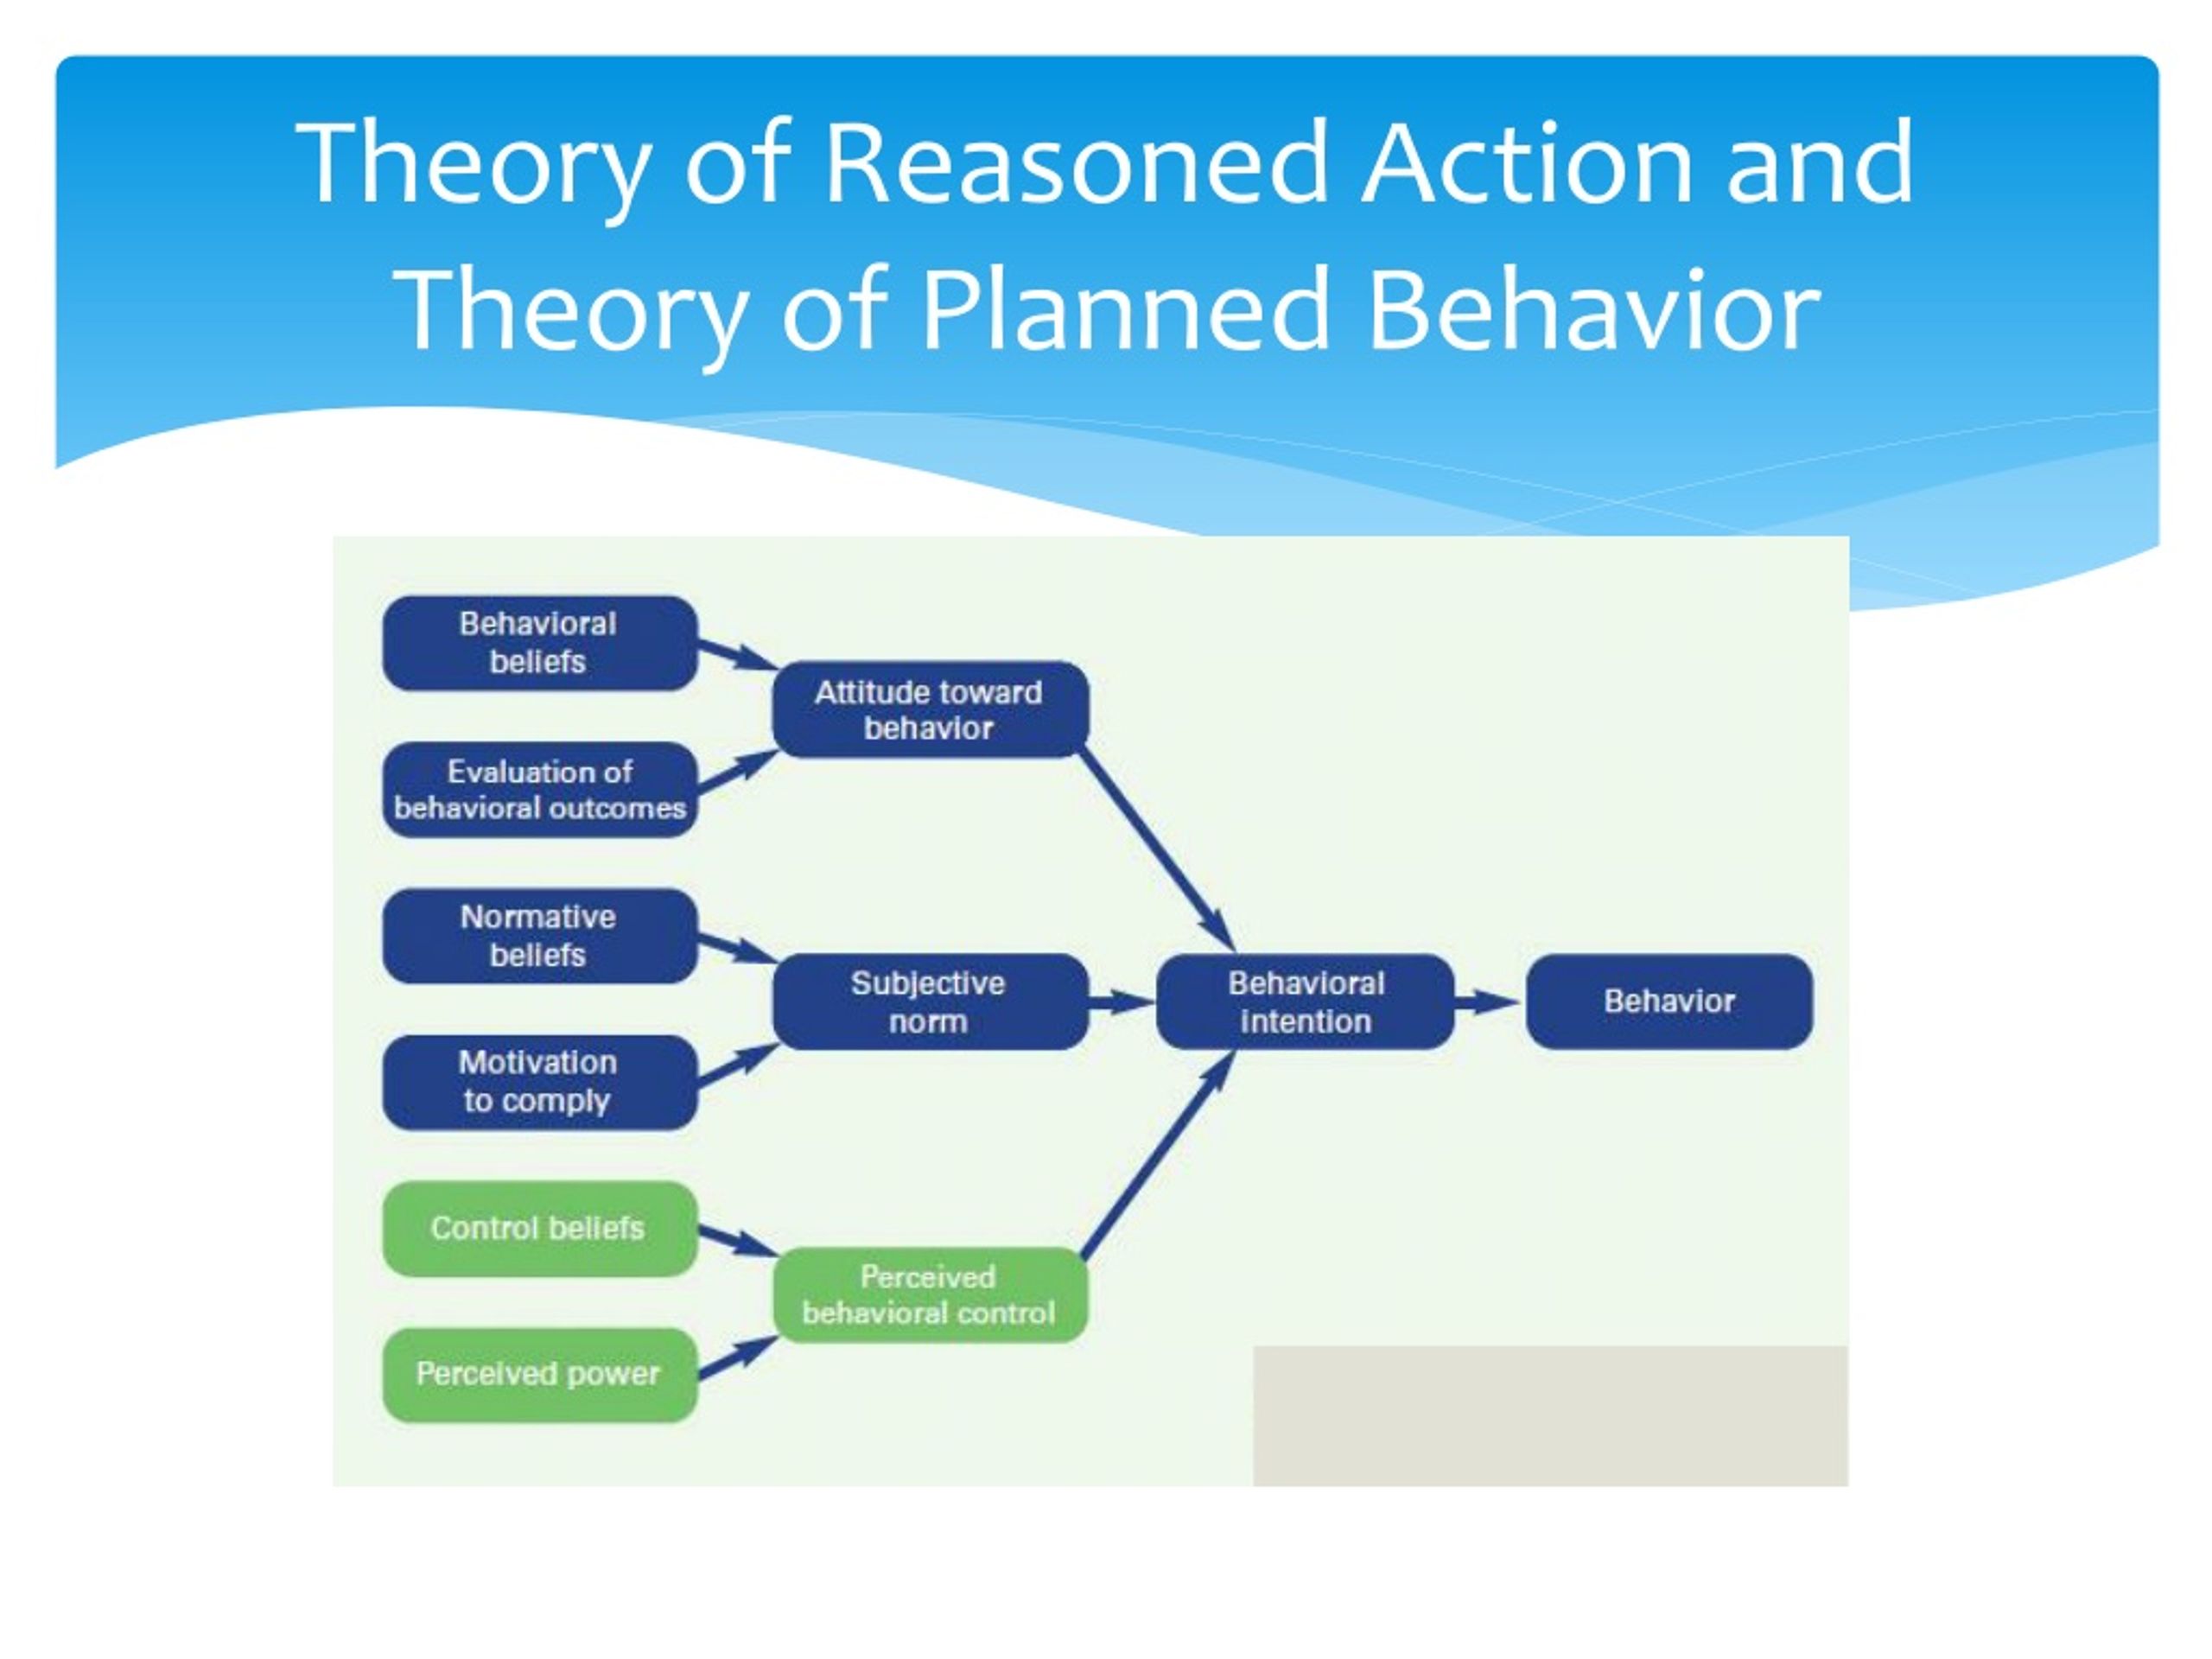 Theory of reasoned Action. Theory of planned Behavior. Theory of reasoned Action; planned Behavior Theory по русски. Theory of reasoned Action (tra) картинка аббревиатура.